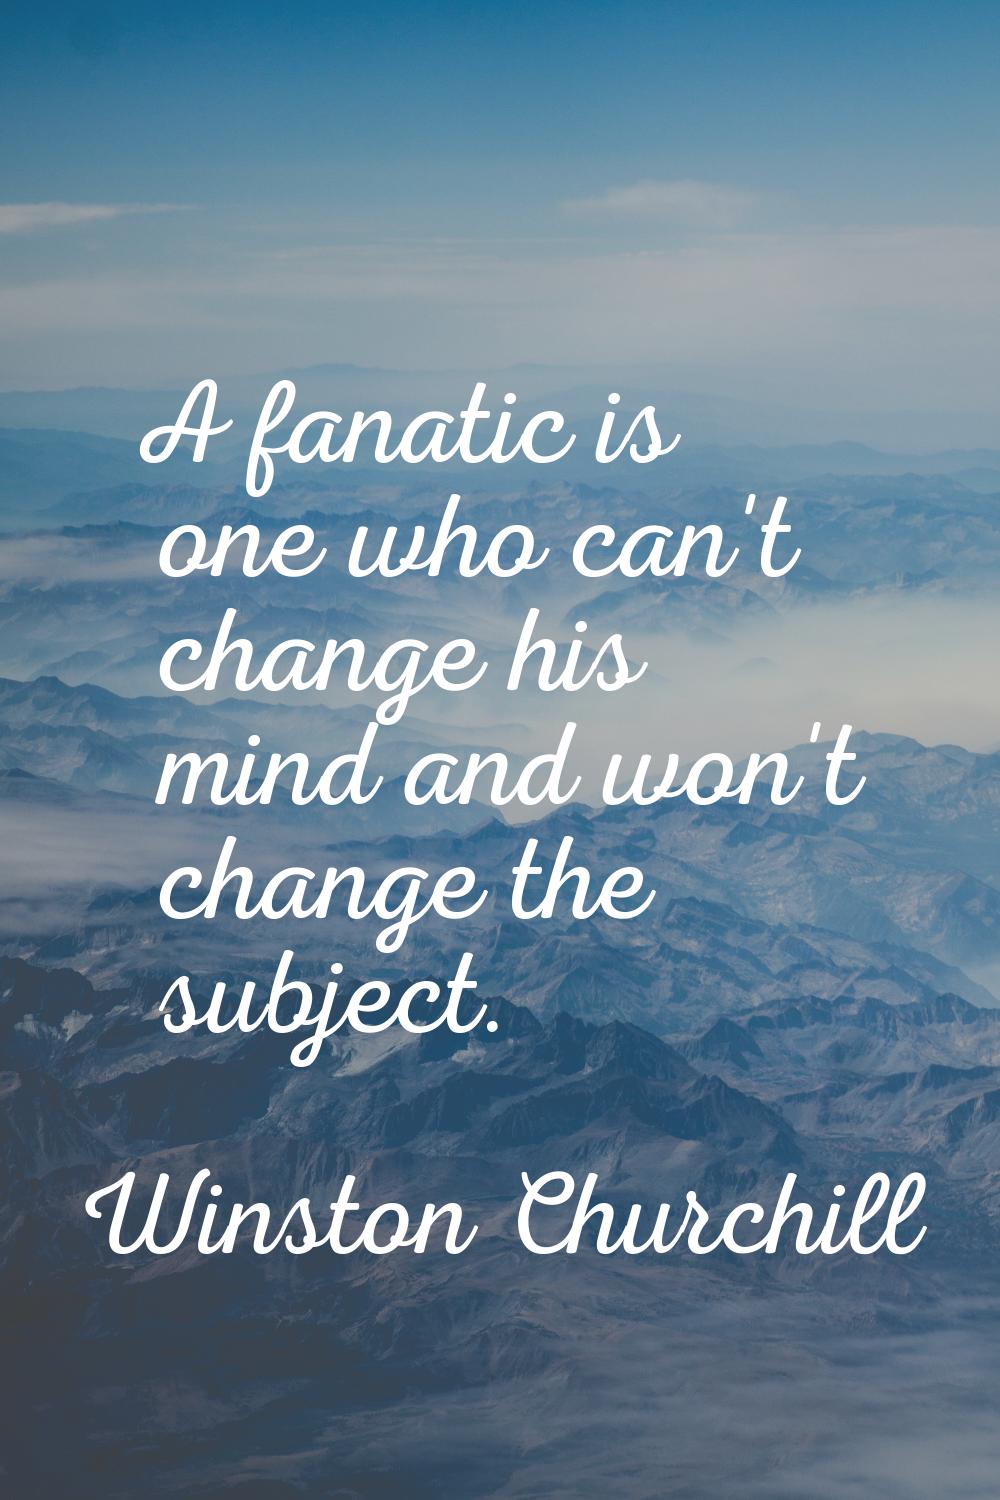 A fanatic is one who can't change his mind and won't change the subject.